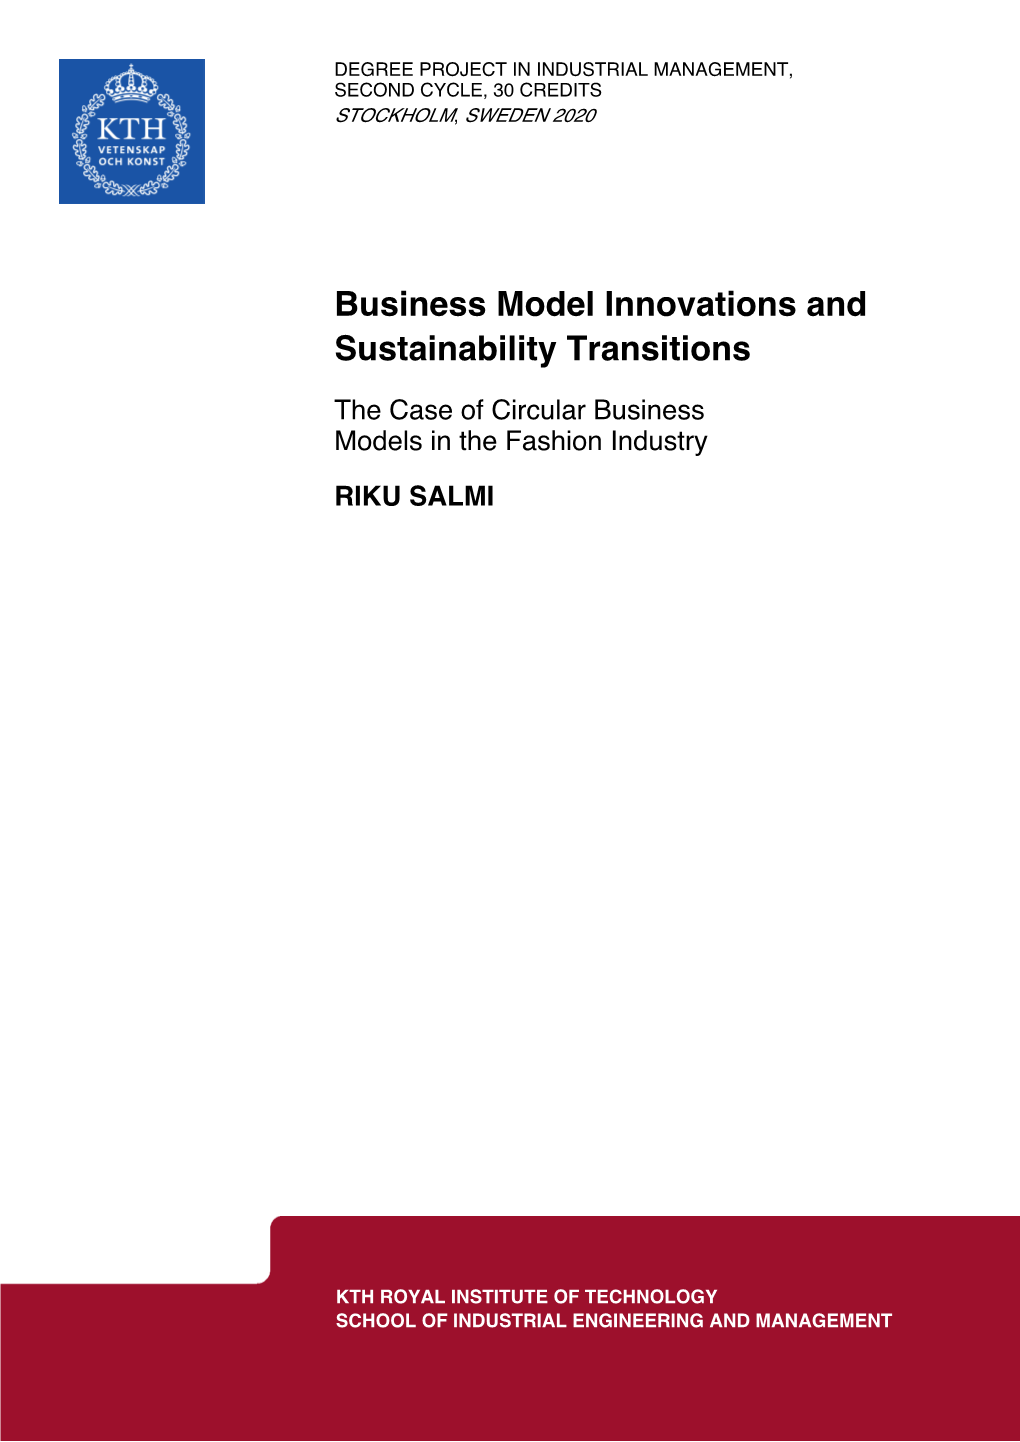 Business Model Innovations and Sustainability Transitions